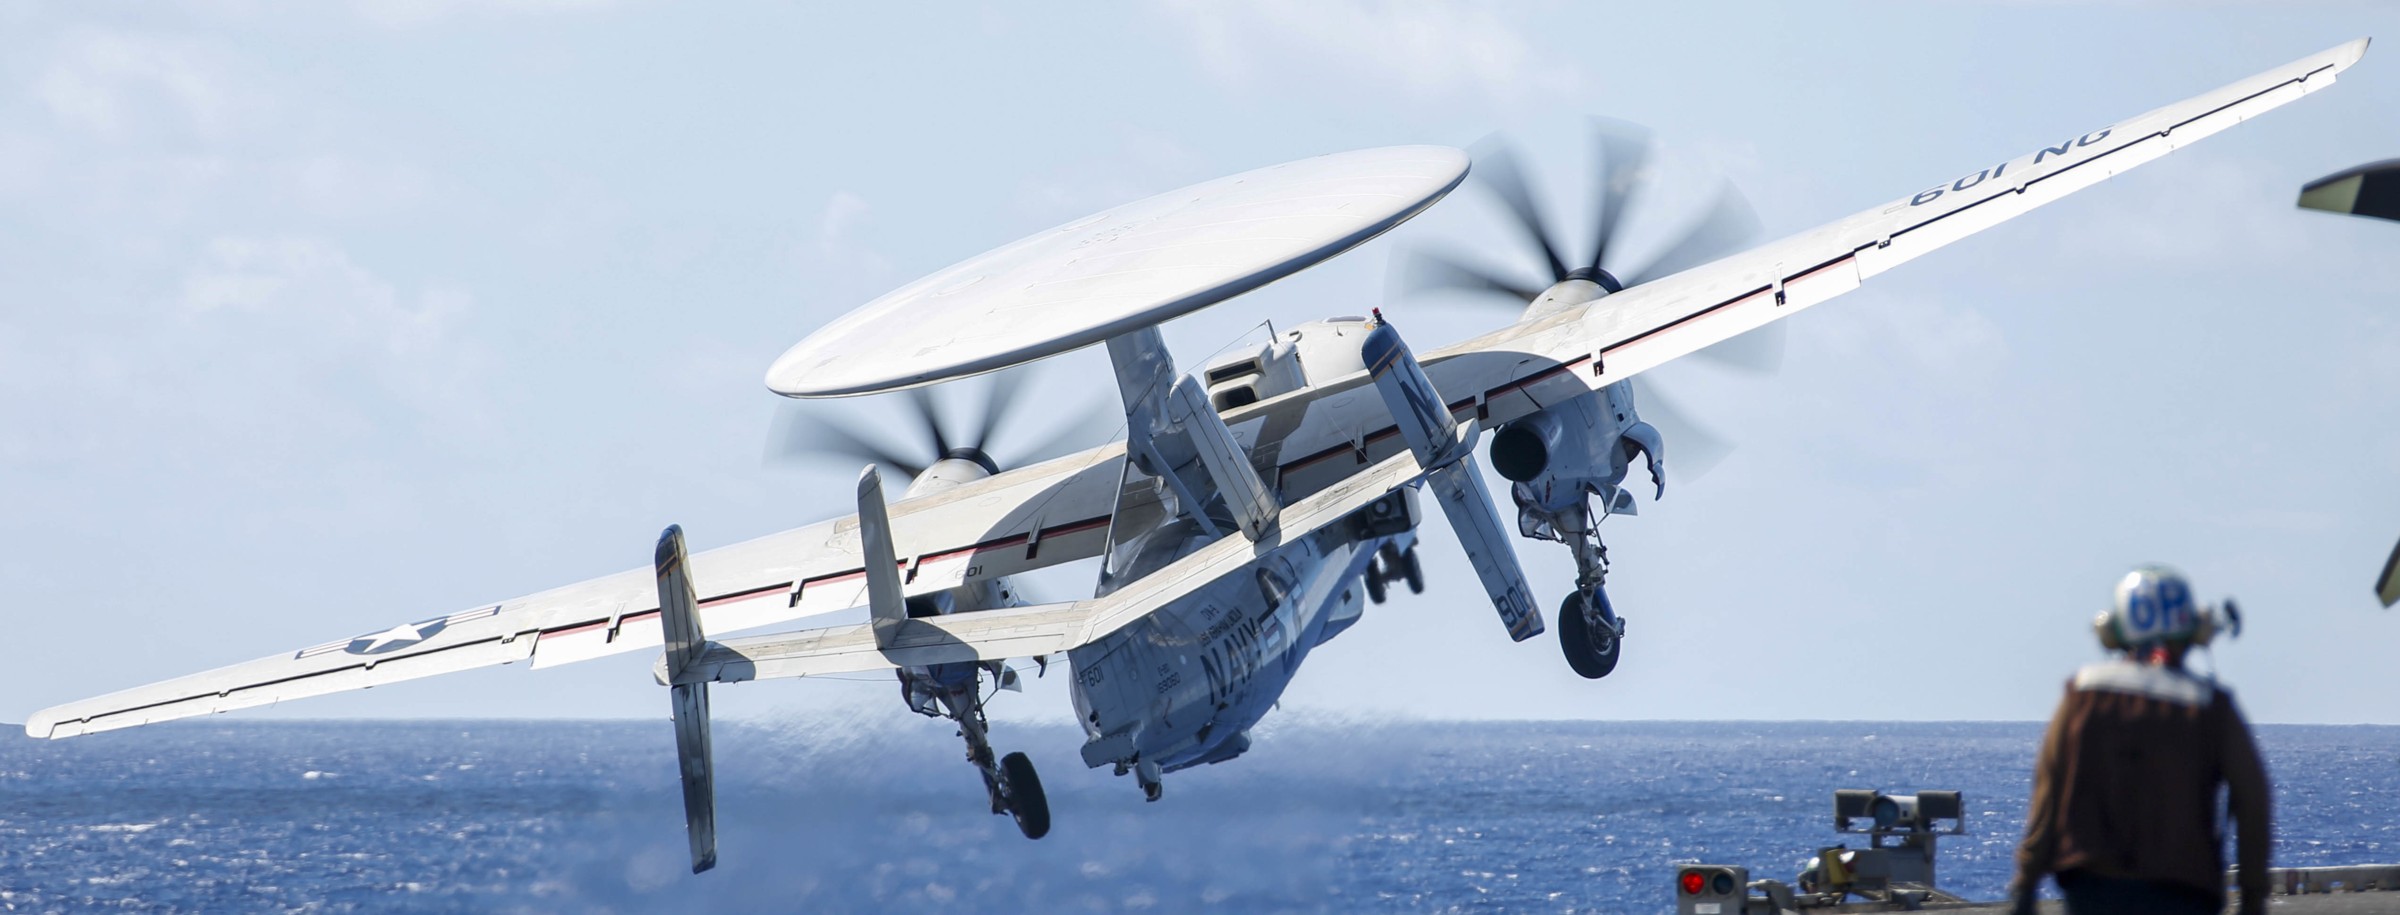 vaw-117 wallbangers airborne command and control squadron navy e-2d hawkeye cvw-9 uss abraham lincoln cvn-72 12